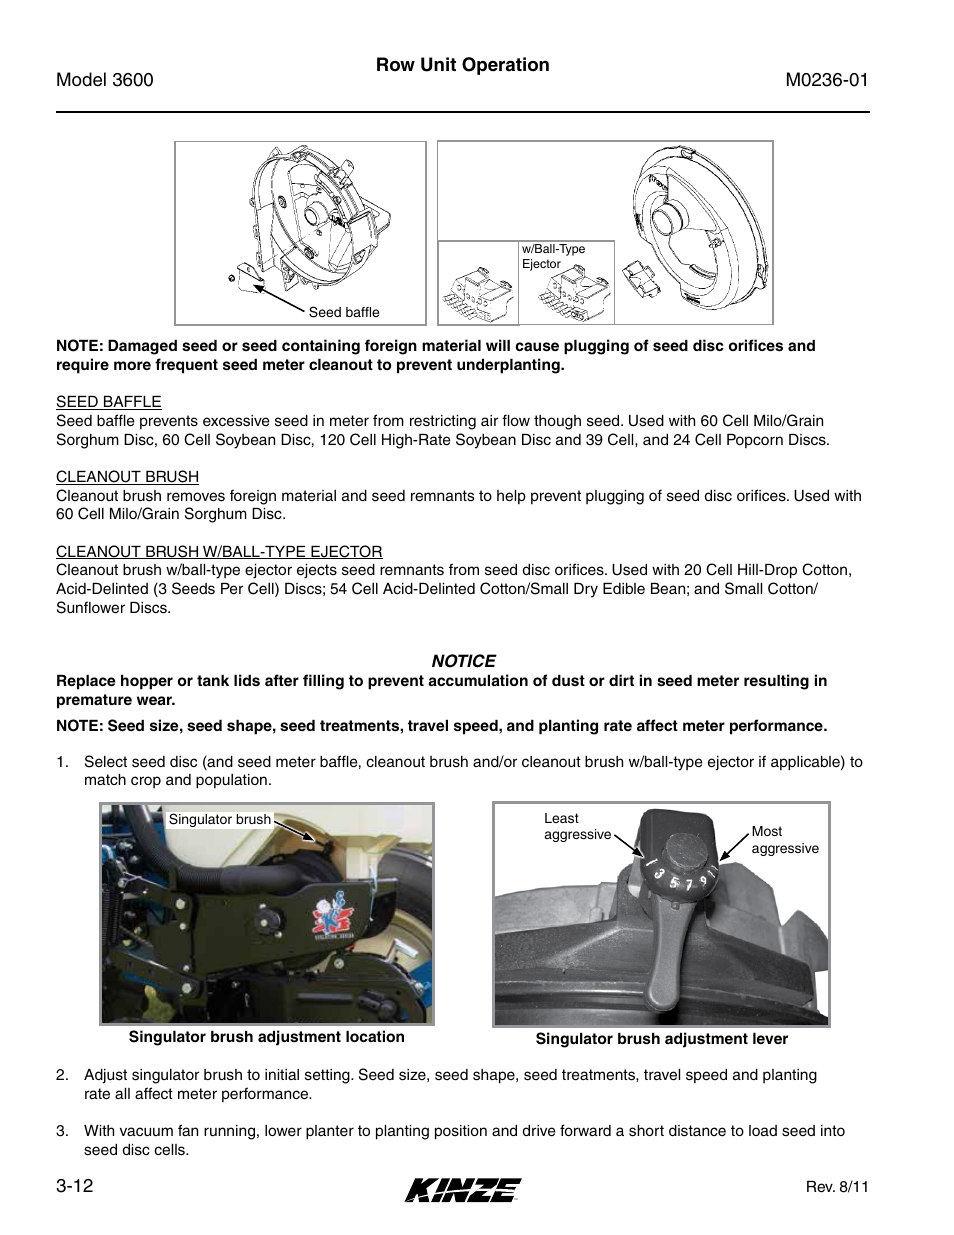 Kinze 3600 Lift and Rotate Planter (70 CM) Rev. 5/14 User Manual | Page 60 / 158